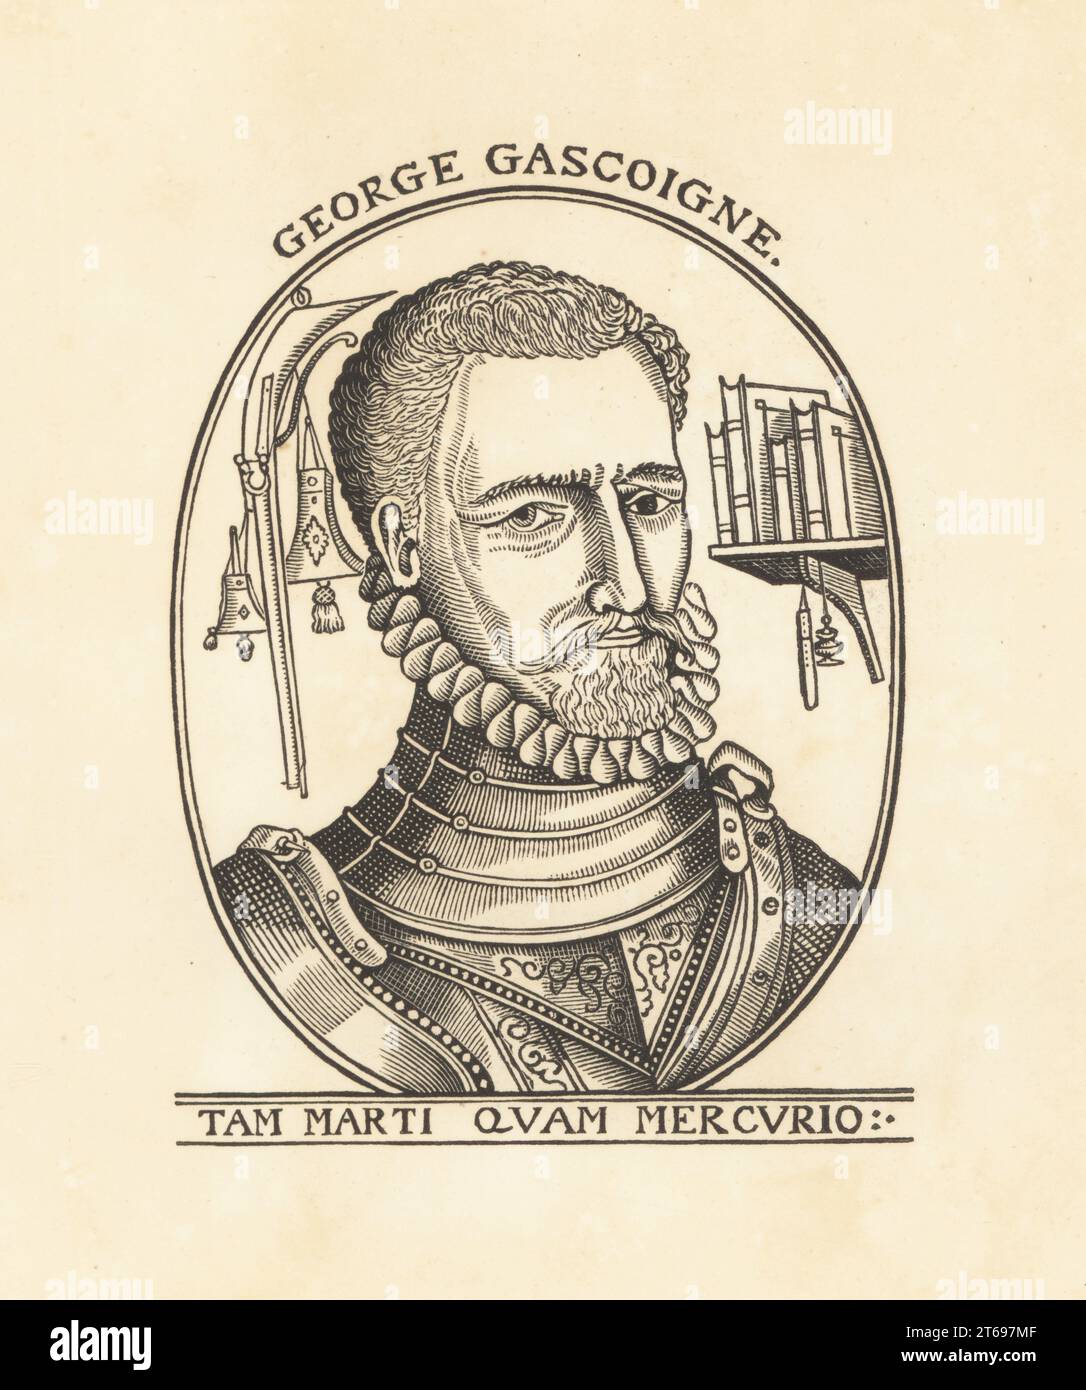 George Gascoigne, English poet, soldier and courtier of the Elizabethan era, 1534-1577. In ruff collar and suit of armour, with books on a shelf. Tam Marti Quam Mercurio. From the woodcut frontispiece to his Steele Glas and Complaynte of Phylomene, 1576. Copperplate engraving from Samuel Woodburns Gallery of Rare Portraits Consisting of Original Plates, George Jones, 102 St Martins Lane, London, 1816. Stock Photo